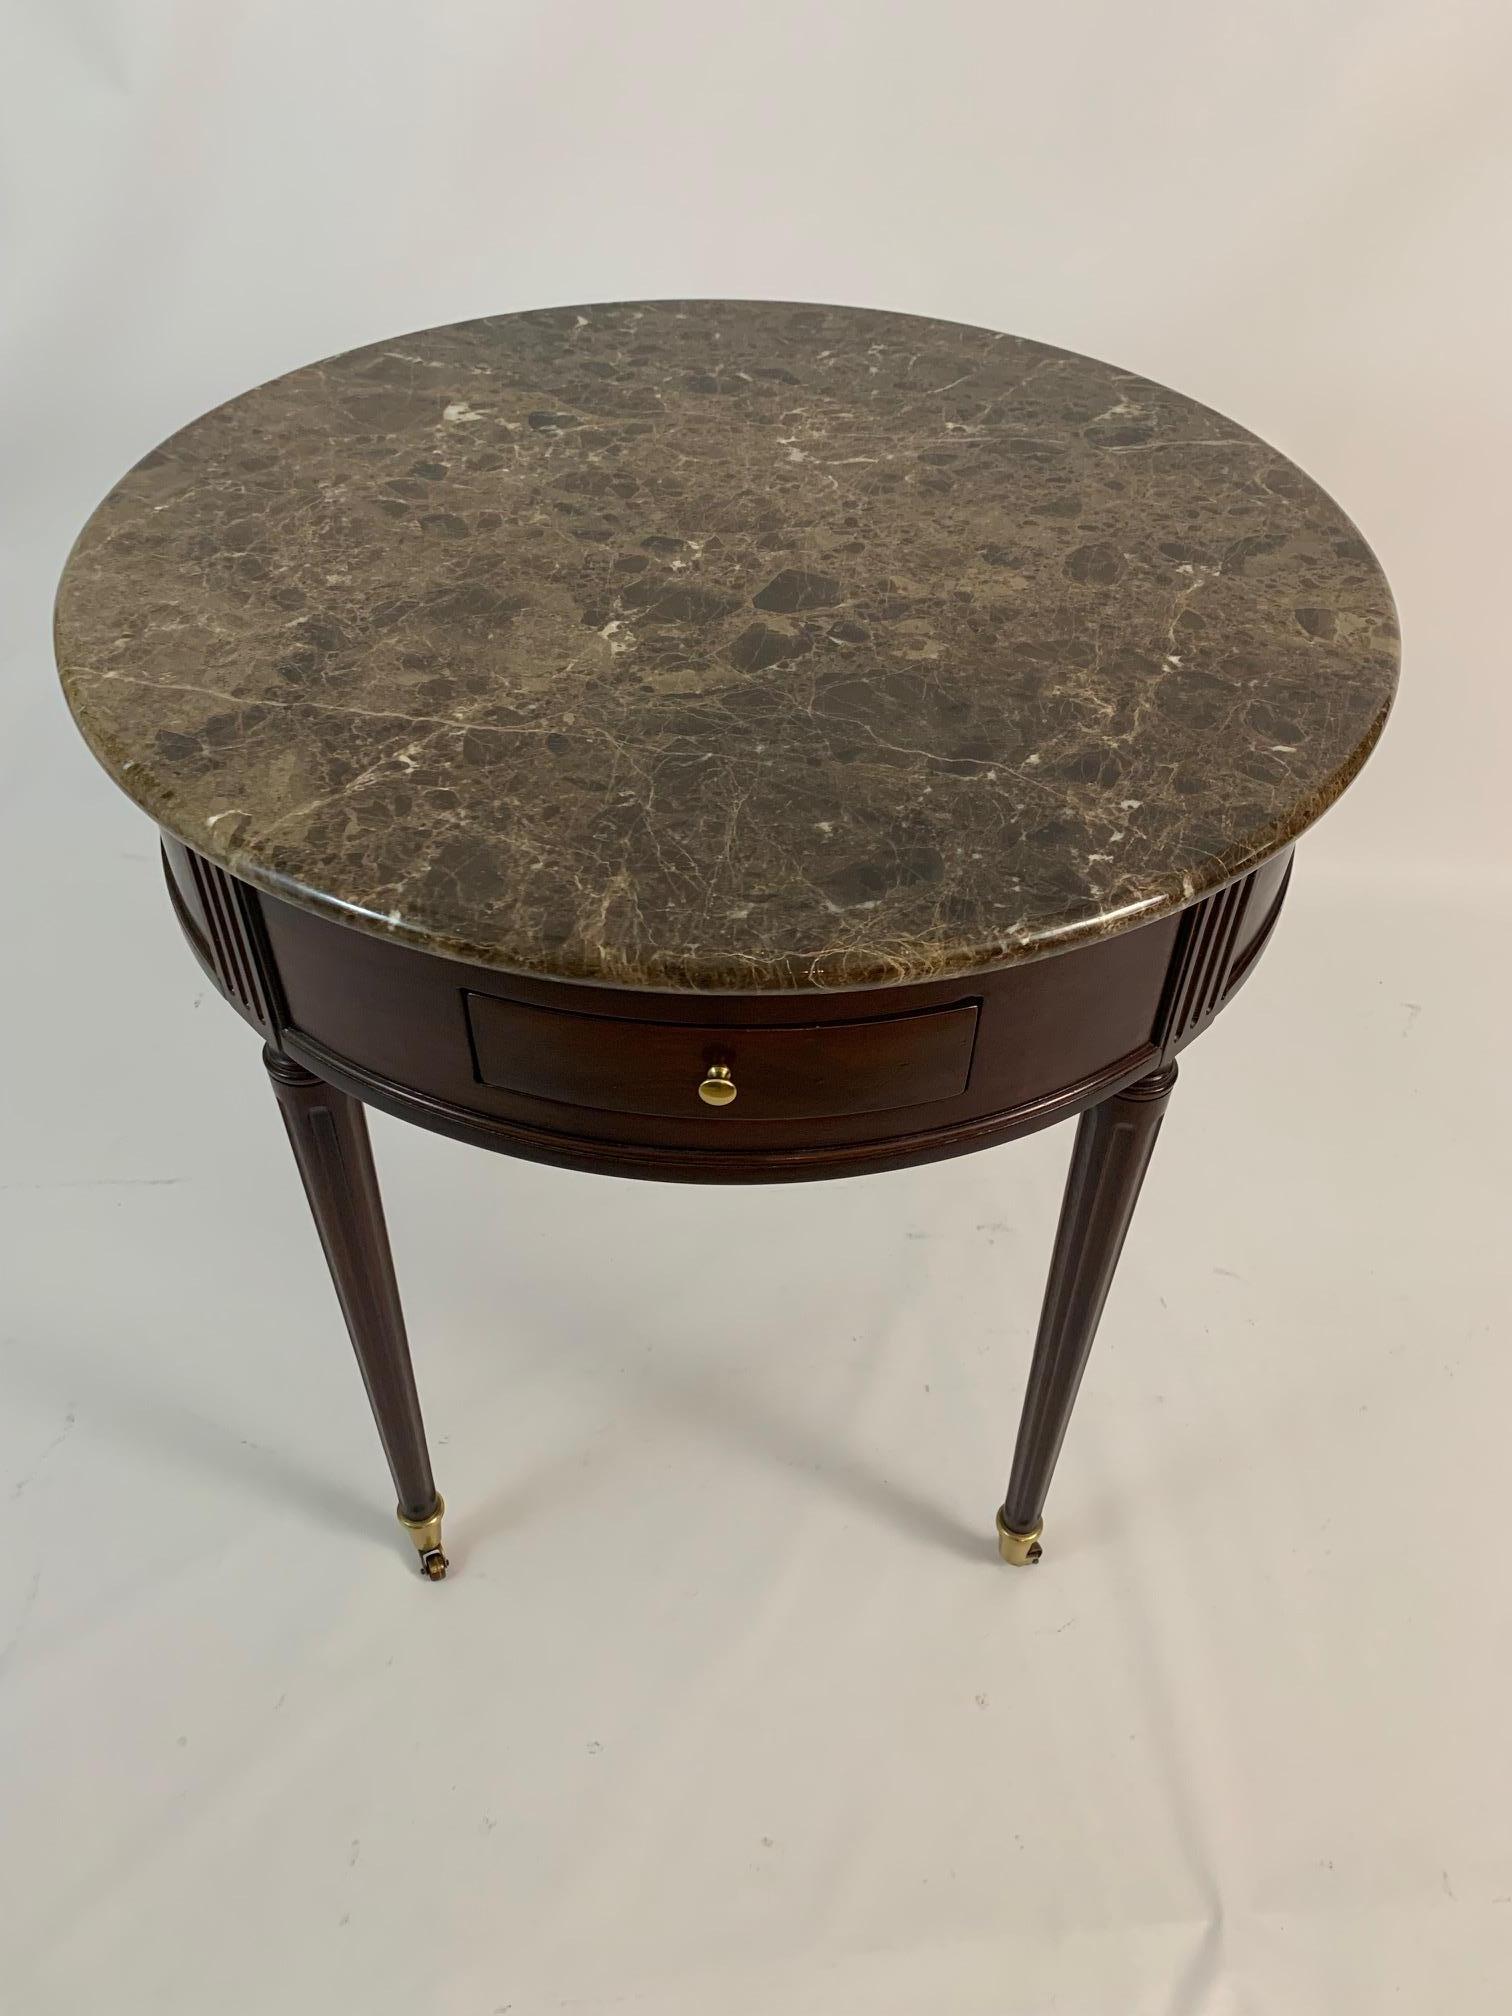 A rich & elegant round mahogany side table having 2 drawers and 2 pull out leather slides as well as a sumptuous marble top. Legs are tapered and terminate in brass caps and casters. Biltmore Estate by Heritage Collection label.
 